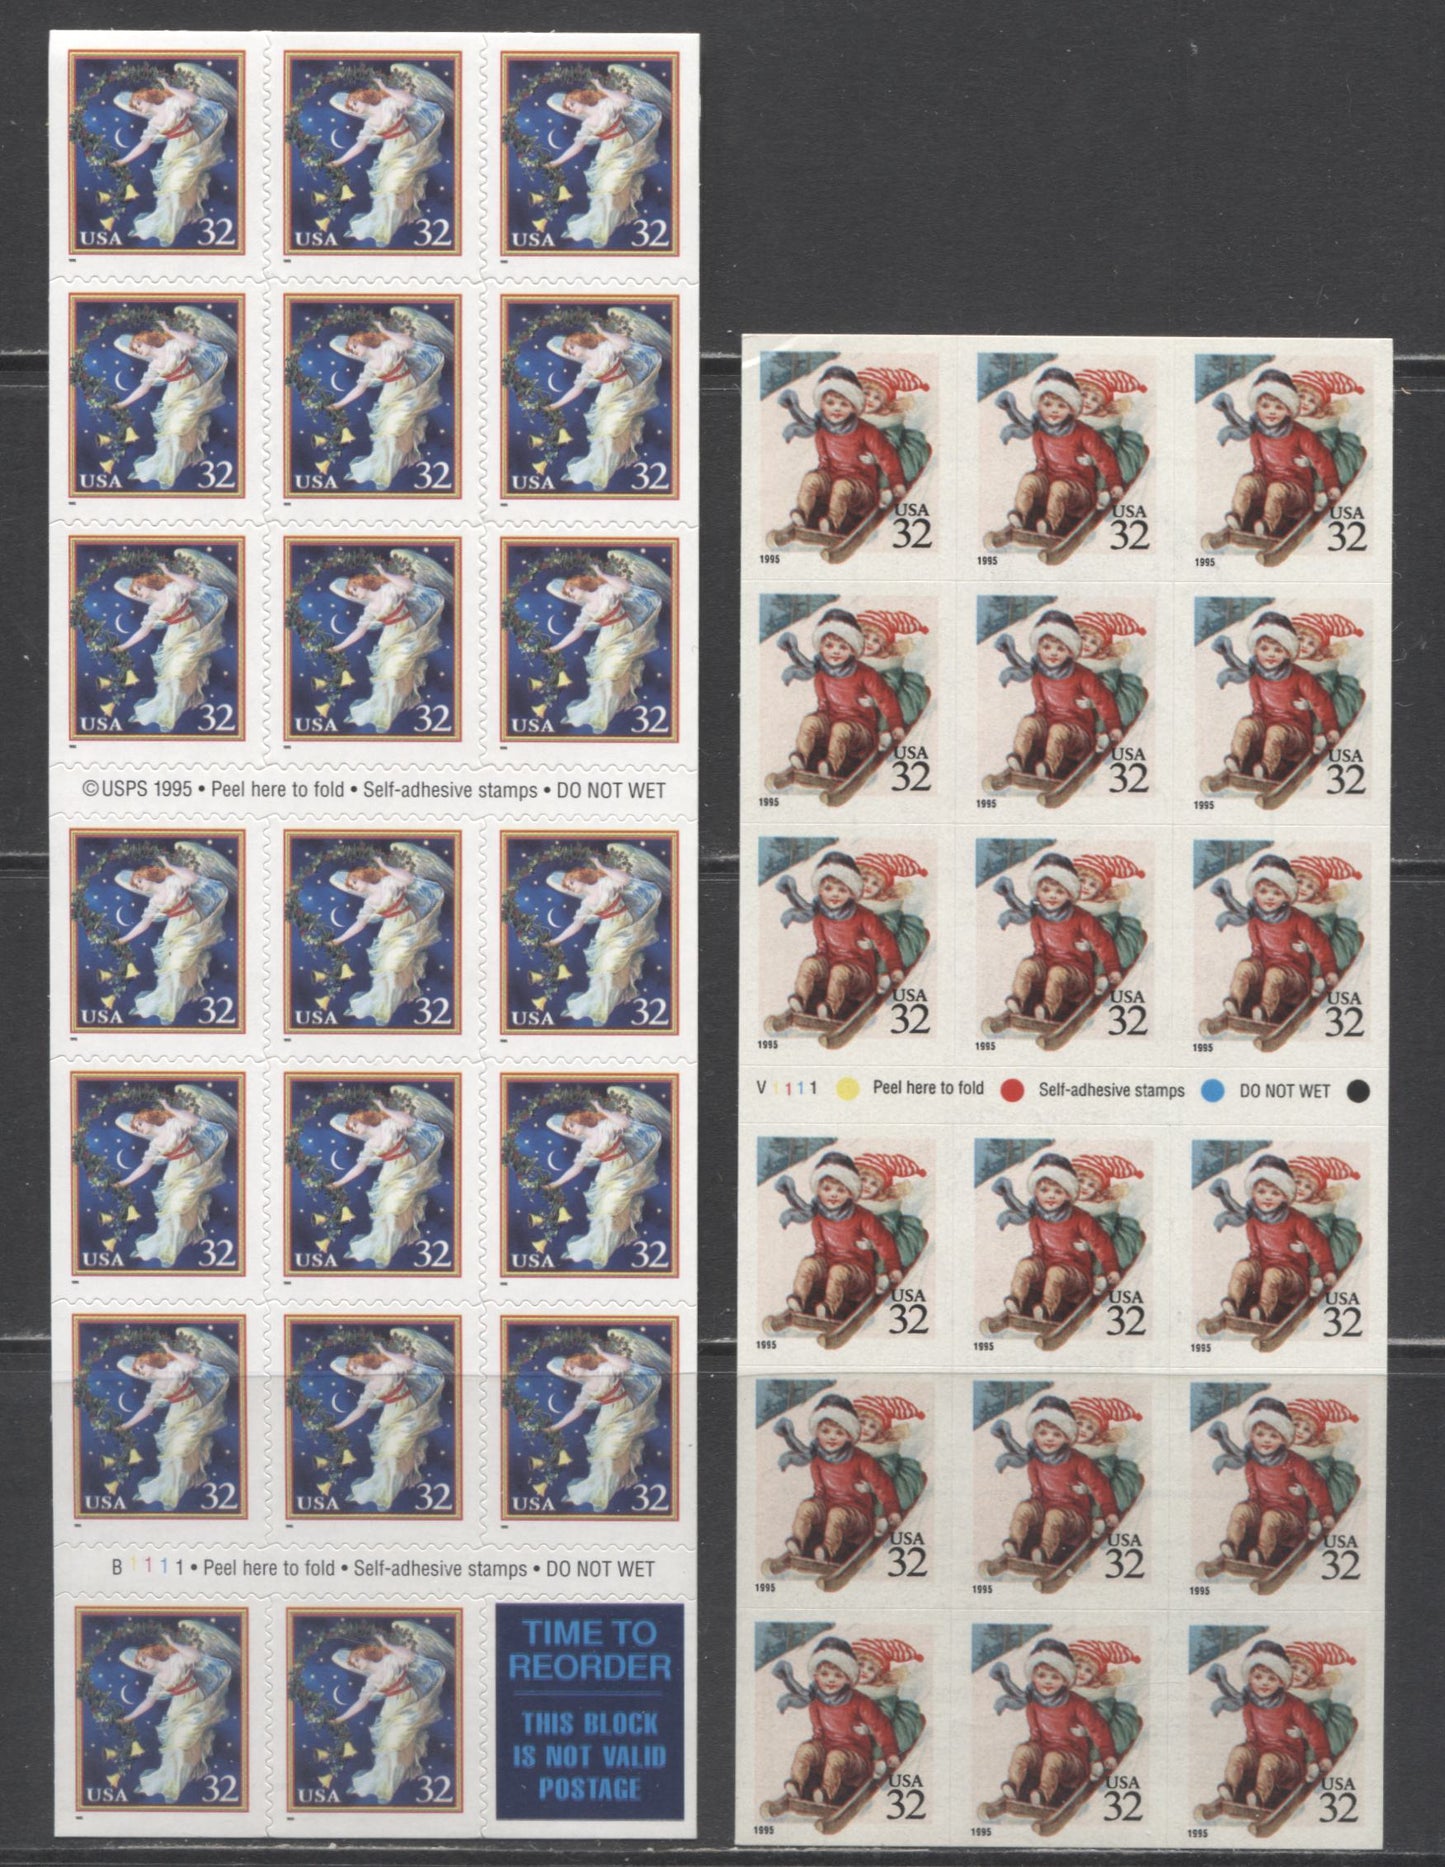 Lot 101 United States SC#3012a-3013a 1995 Christmas Issue, 2 VFNH Blocks Of 18 & Booklet Of 20, Click on Listing to See ALL Pictures, 2017 Scott Cat. $25